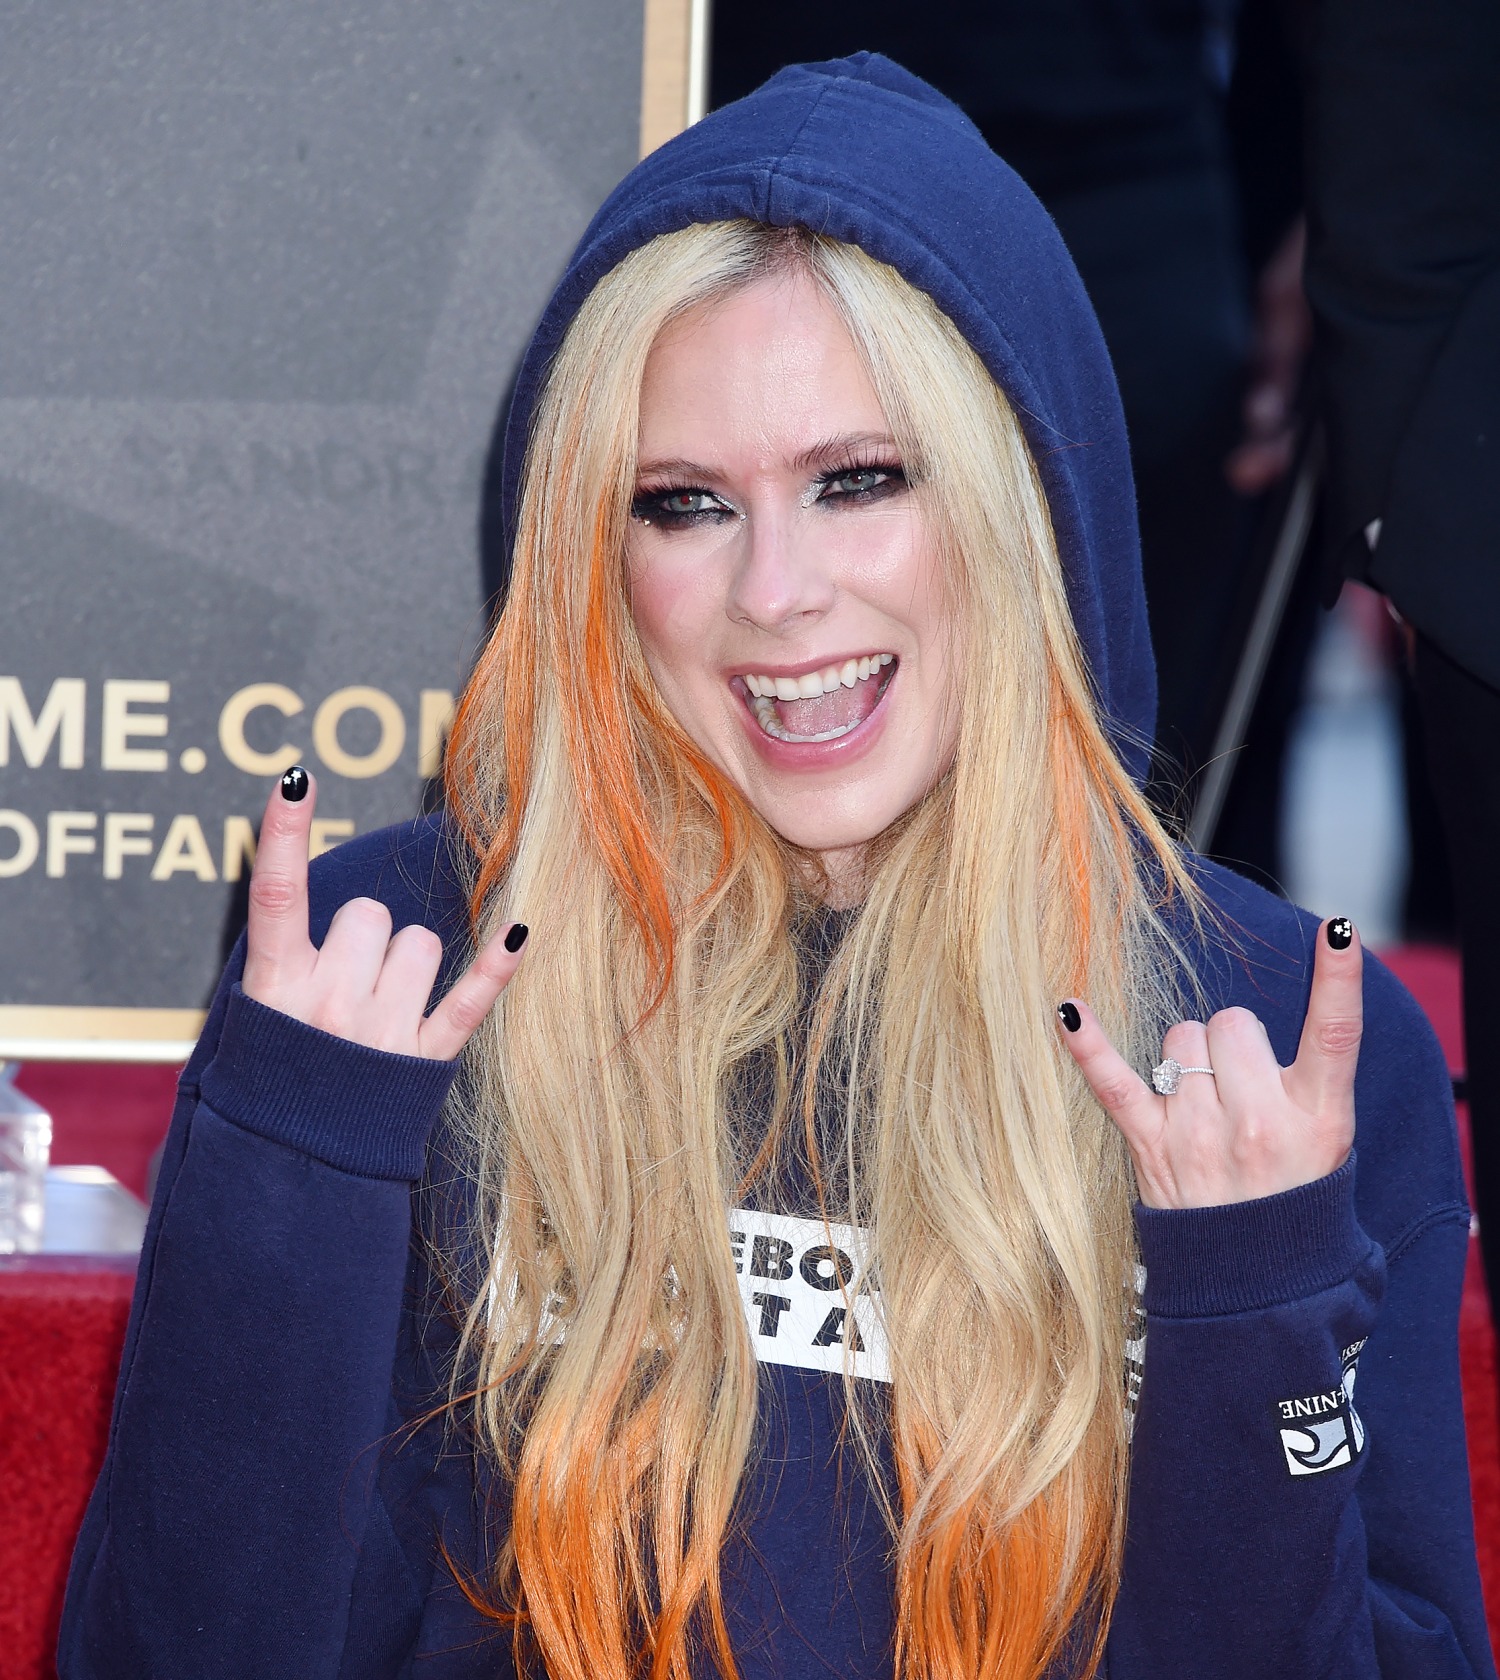 Chop! Avril Lavigne says goodbye to her signature long hair